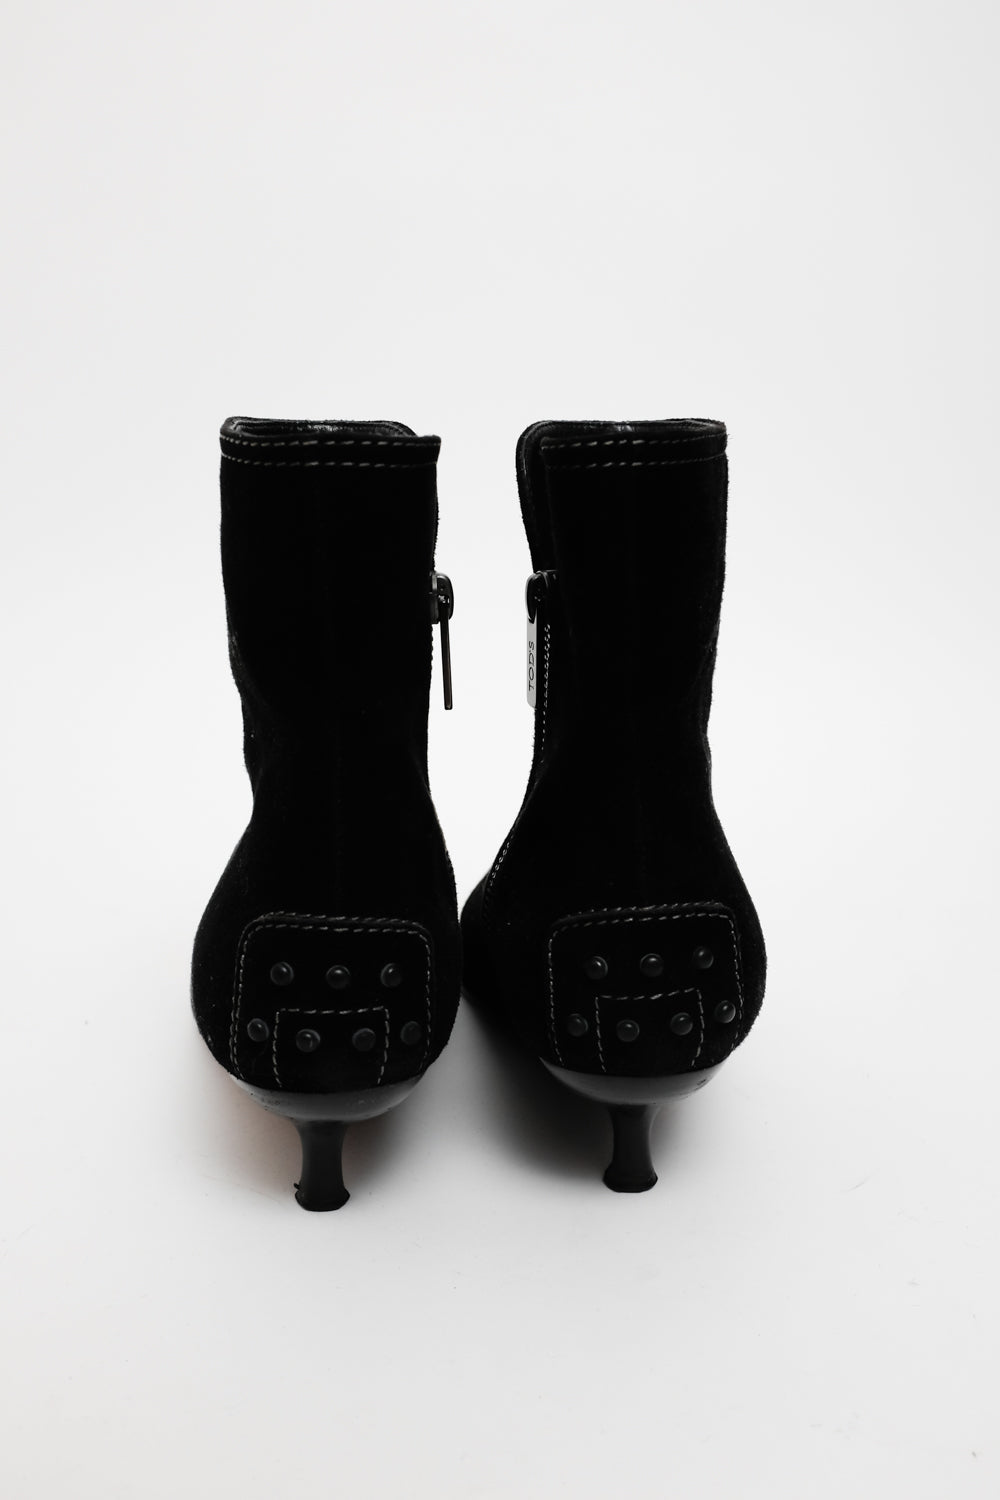 0065_TODS 39 BLACK SUEDE STILETTO BOOTS